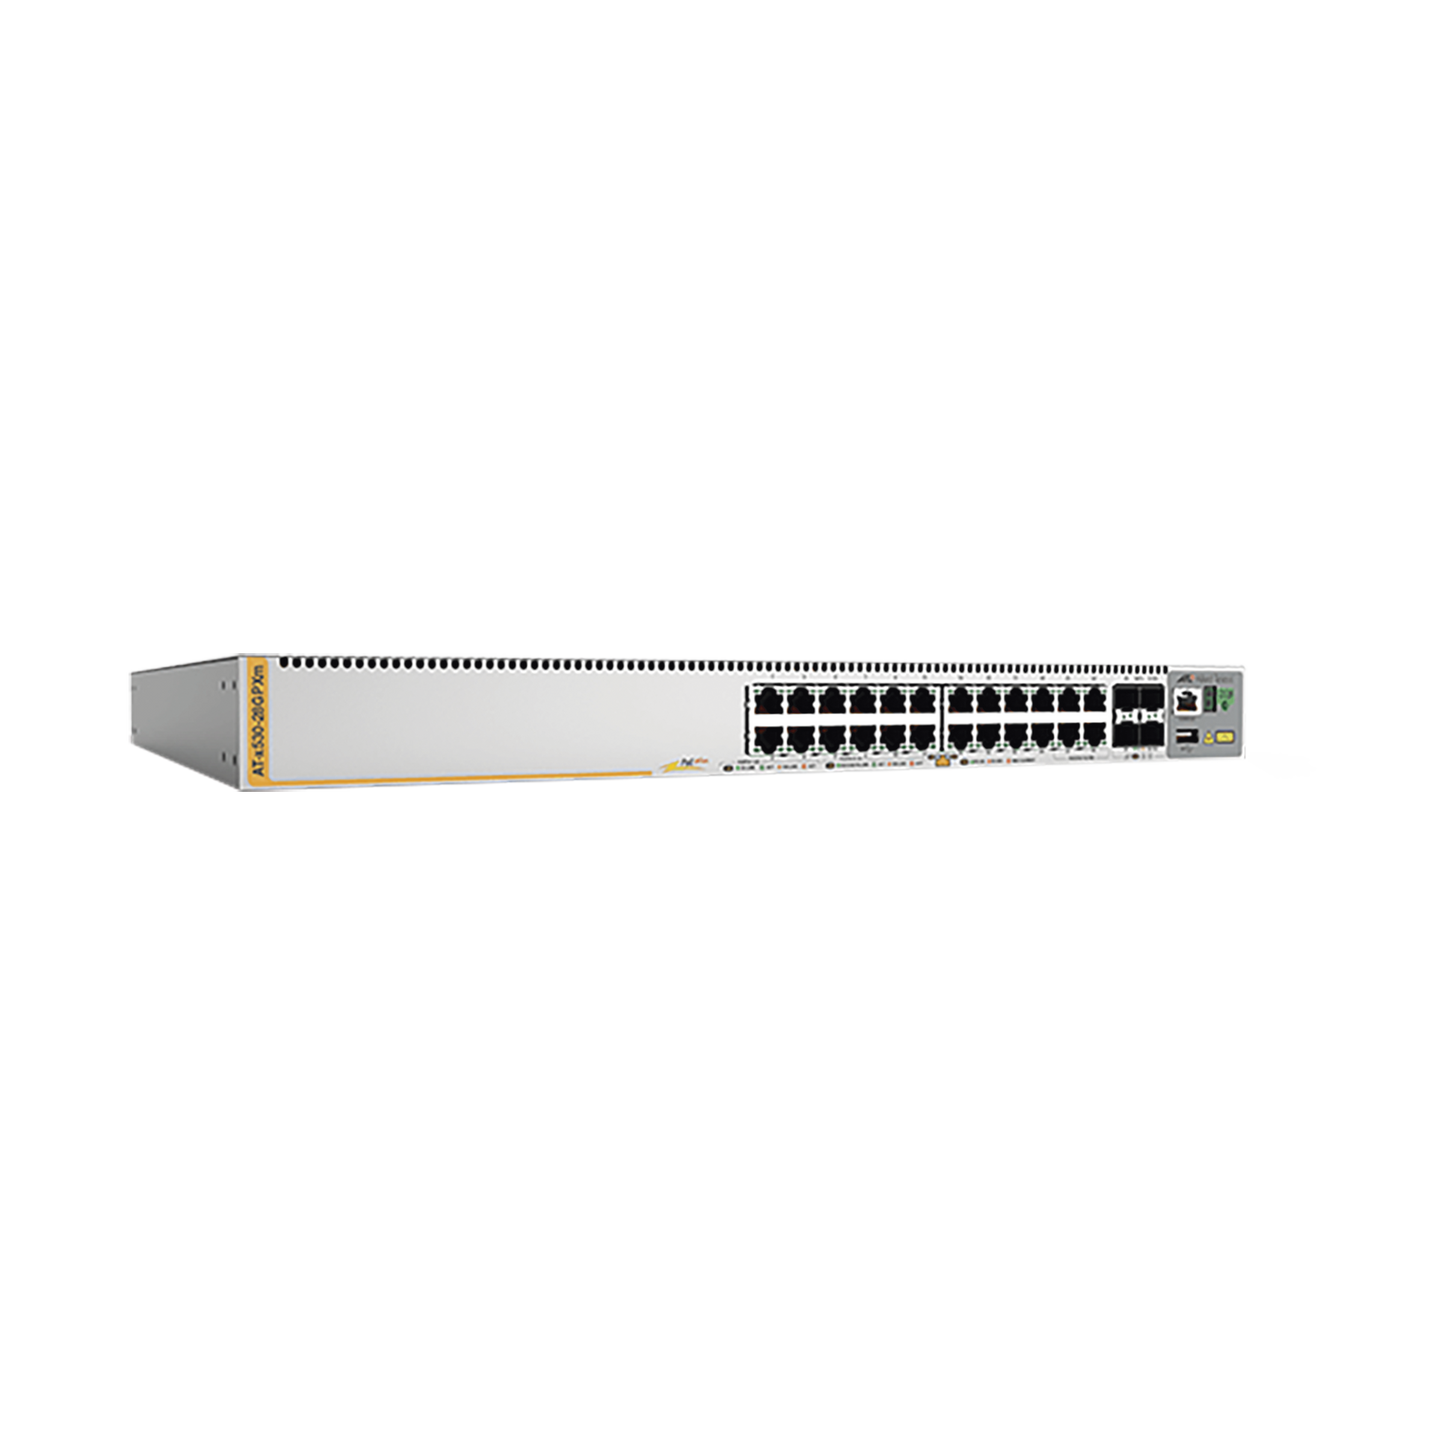 L3 Stackable Gigabit Edge Switch with 20x 10/100/1000-T PoE+ , 4x 100M/1G/2.5G/5G-T PoE+, 4 x 10 G SFP+ ports, up to 740 W and 2 fixed power supplies